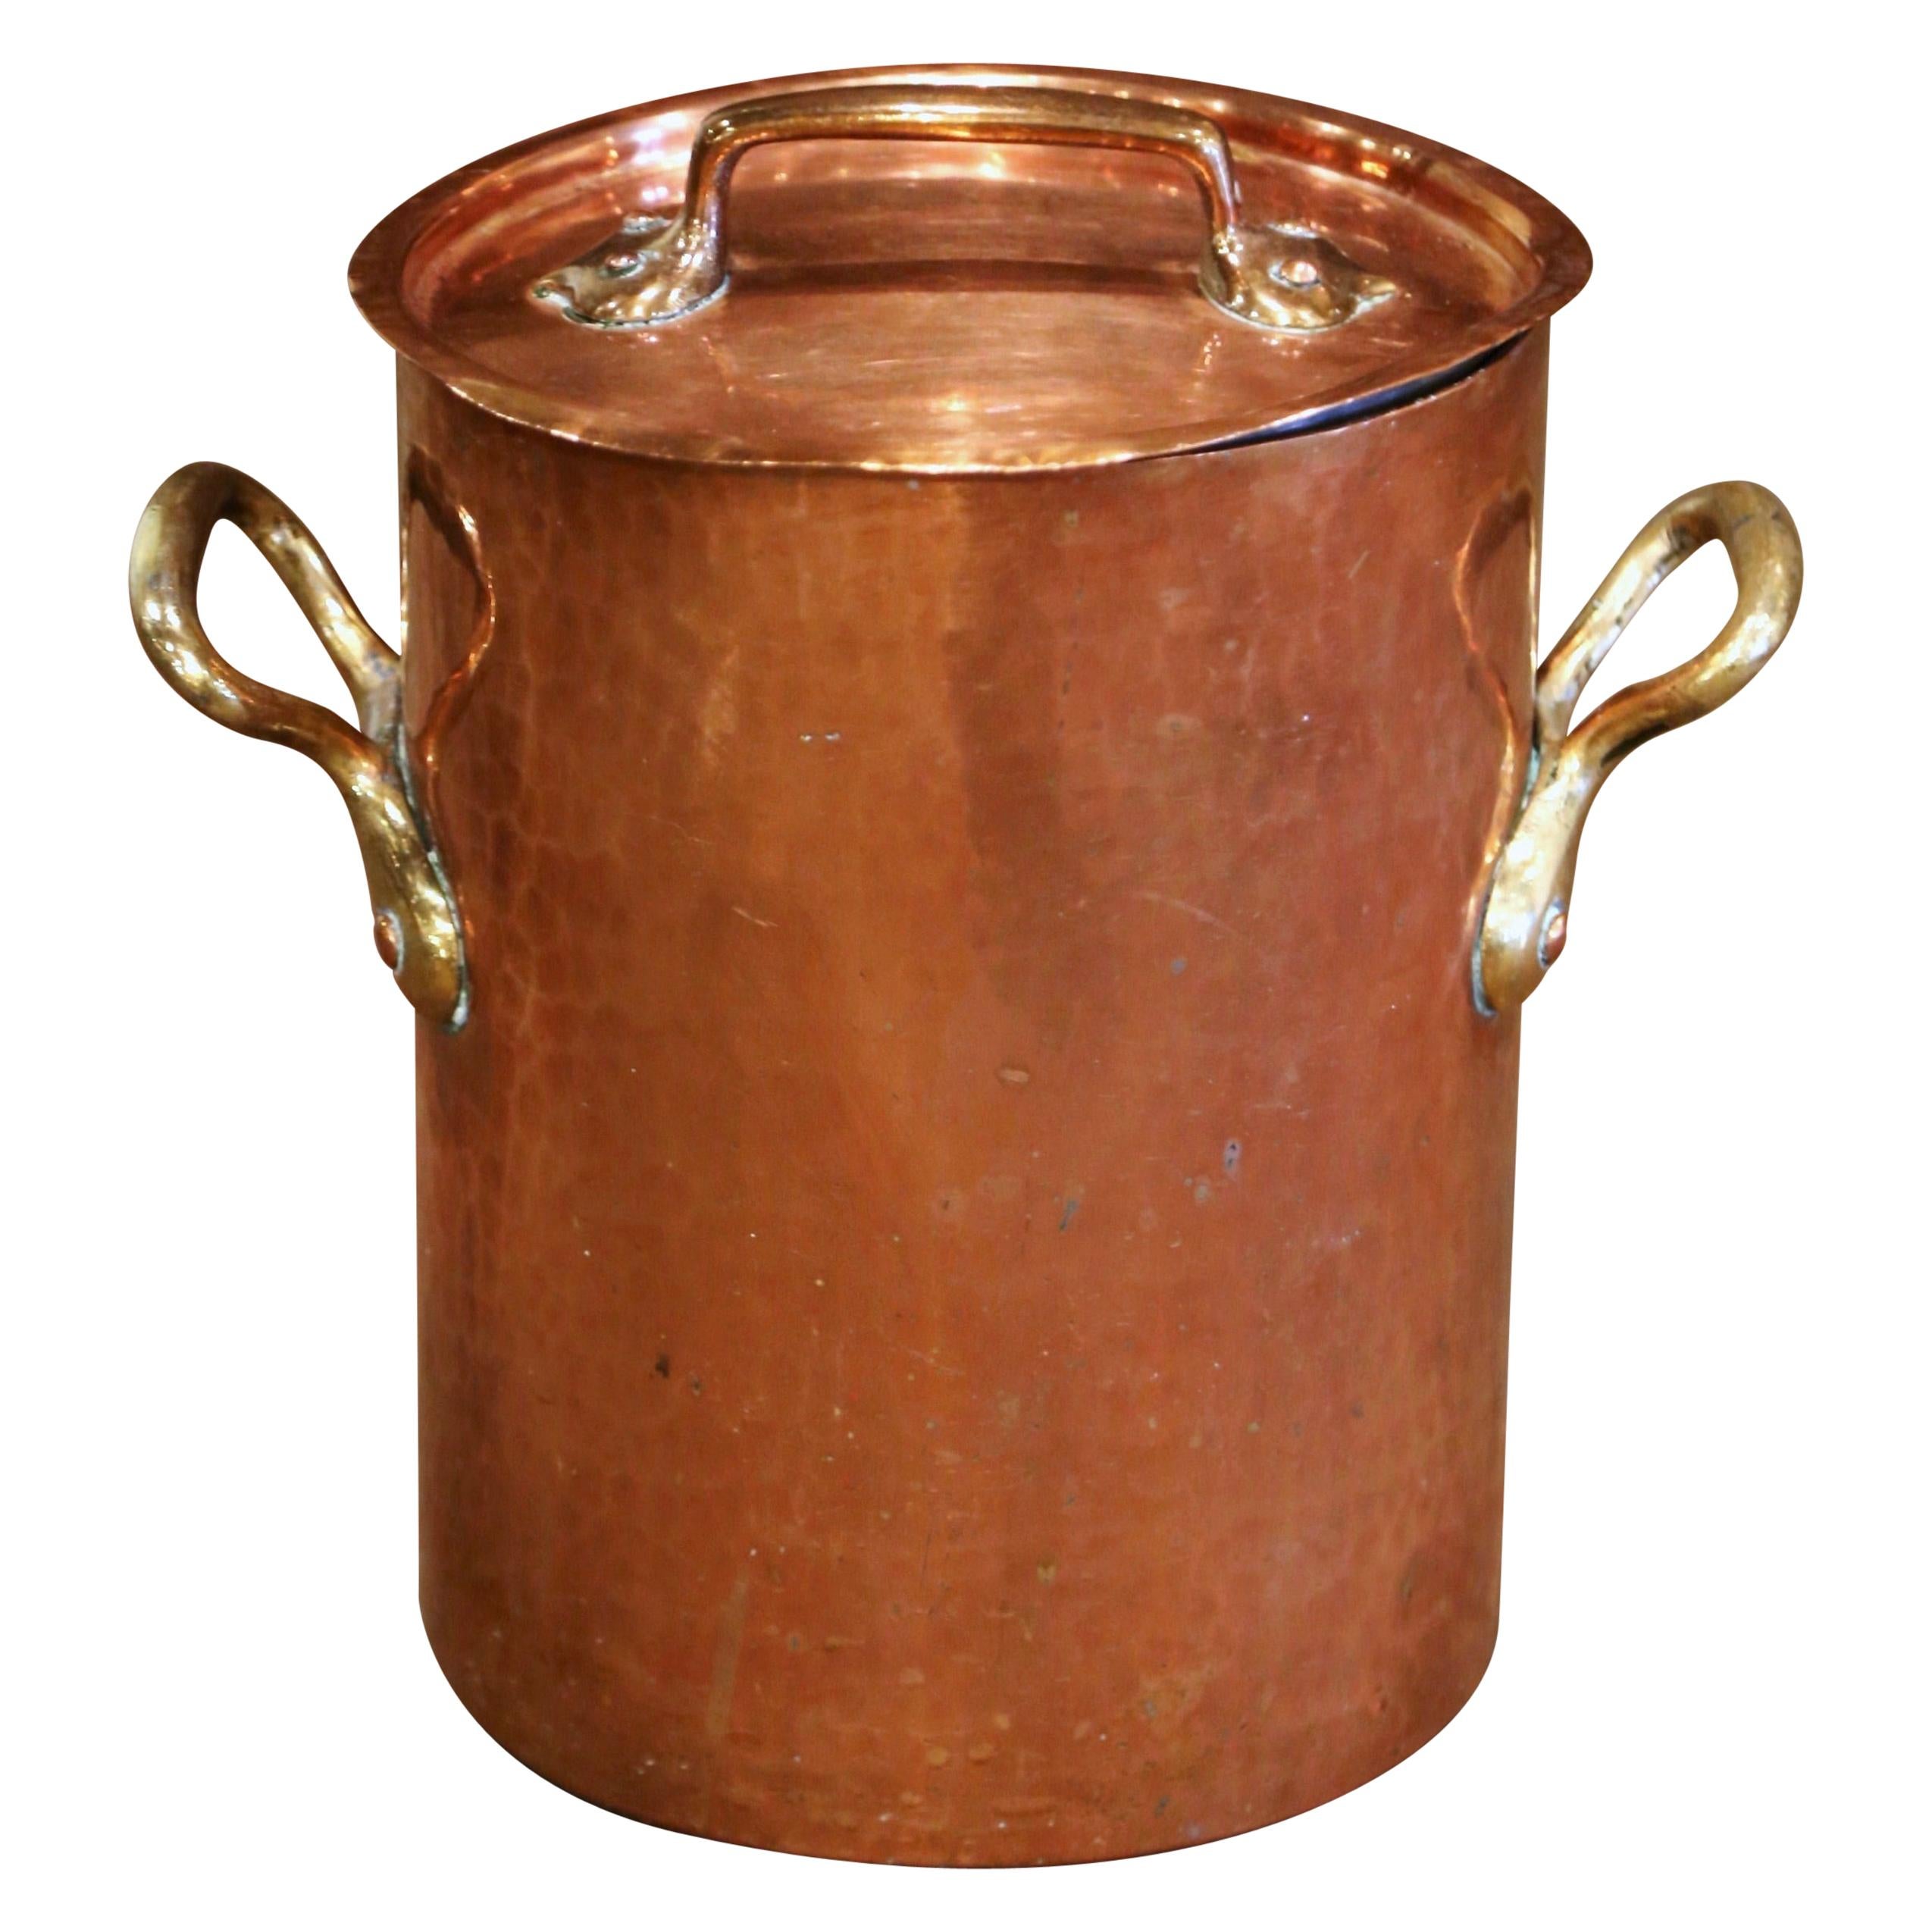 Mid-19th Century French Polished Copper Cauldron with Side Handles and Lid